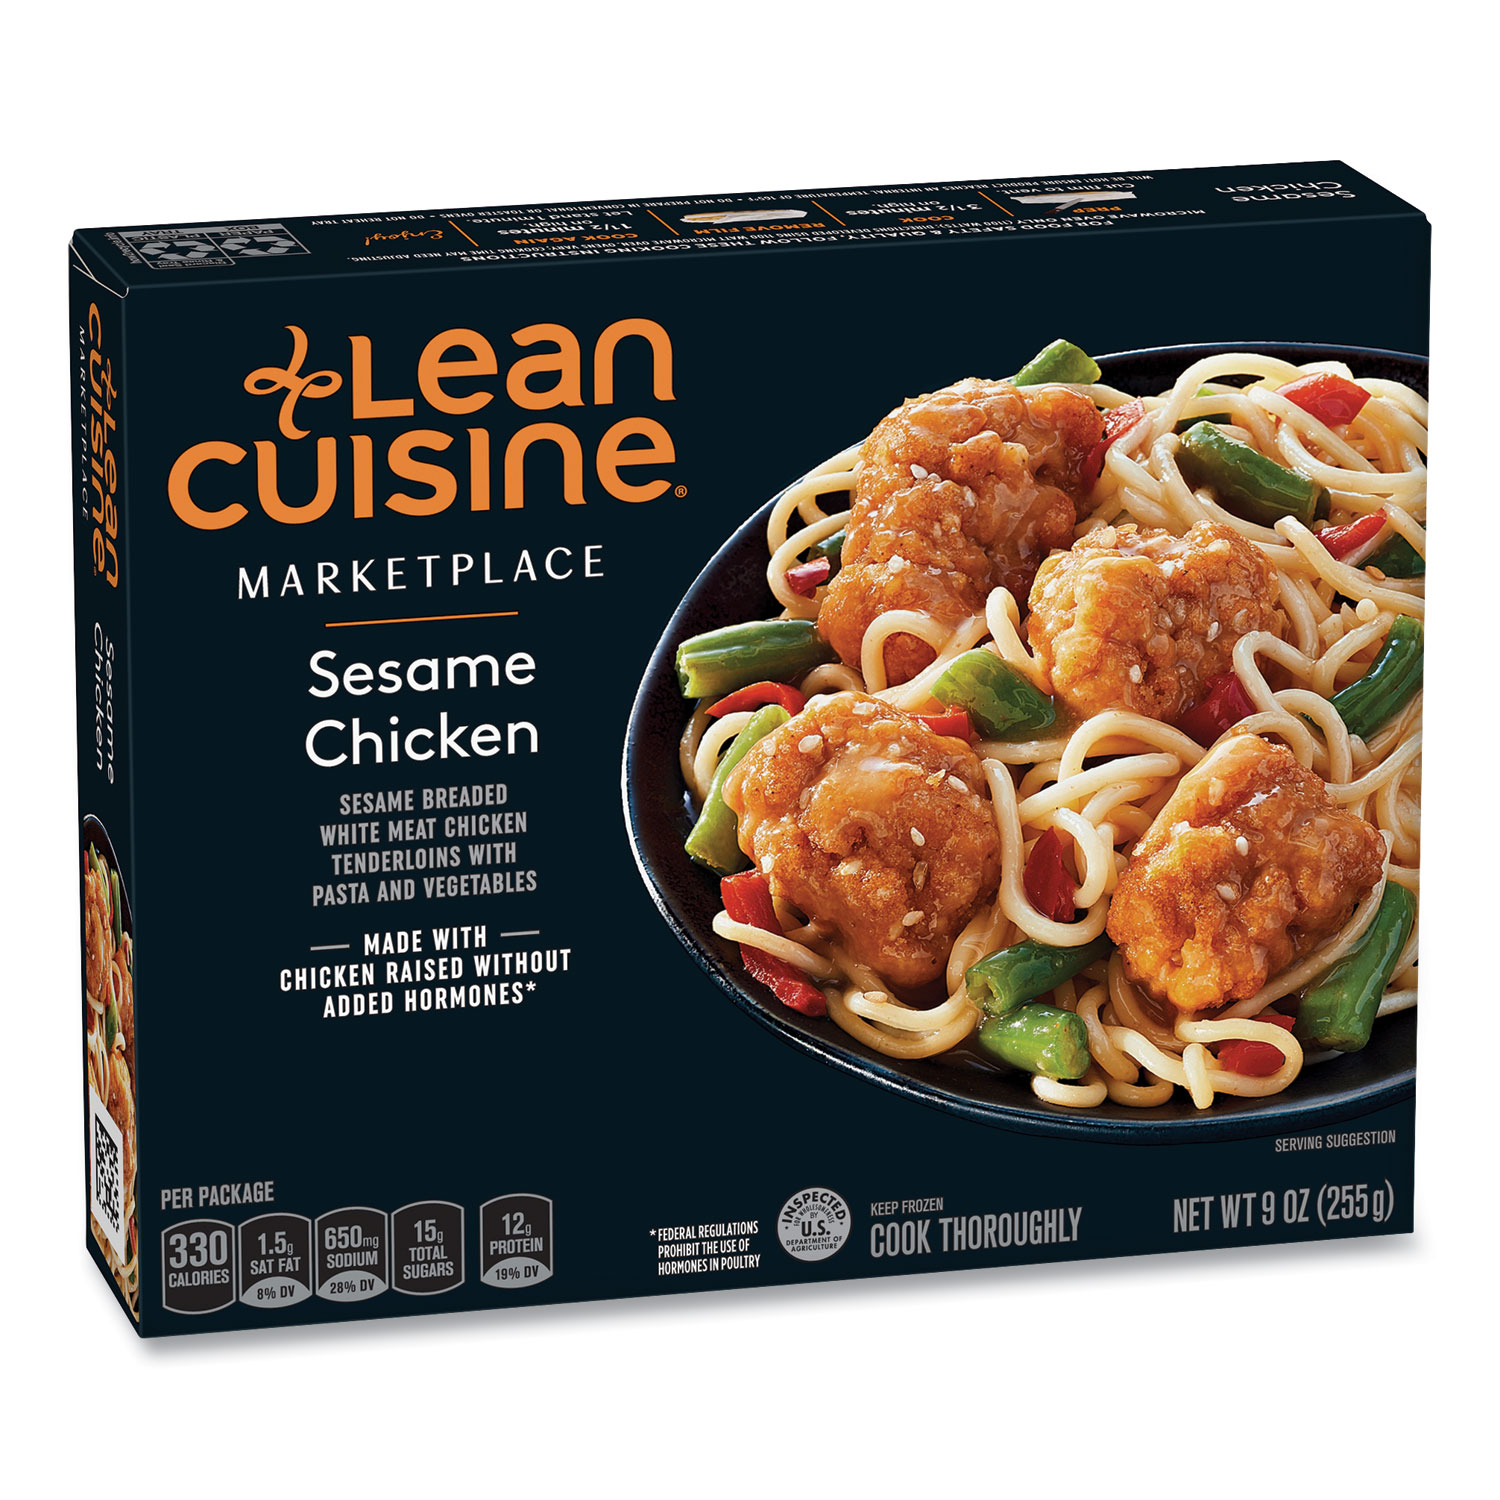  Lean Cuisine 654554 Marketplace Sesame Chicken, 9 oz Box, 3 Boxes/Pack, Free Delivery in 1-4 Business Days (GRR90300125) 